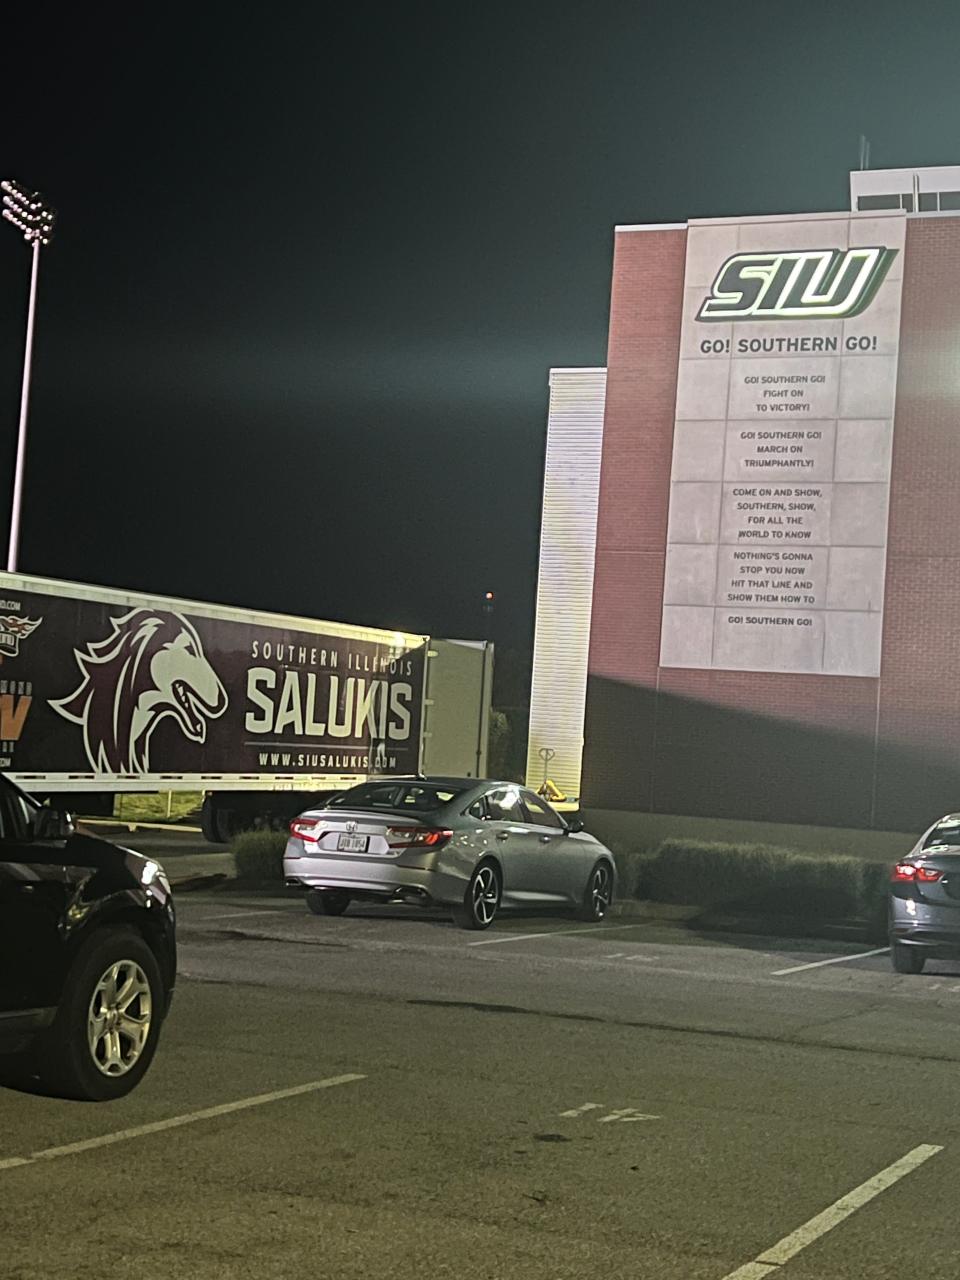 The Banterra Center, Southern Illinois University's basketball arena, has the school's fight song engraved in the facade of the building facing the parking lot it shares with Saluki Stadium.